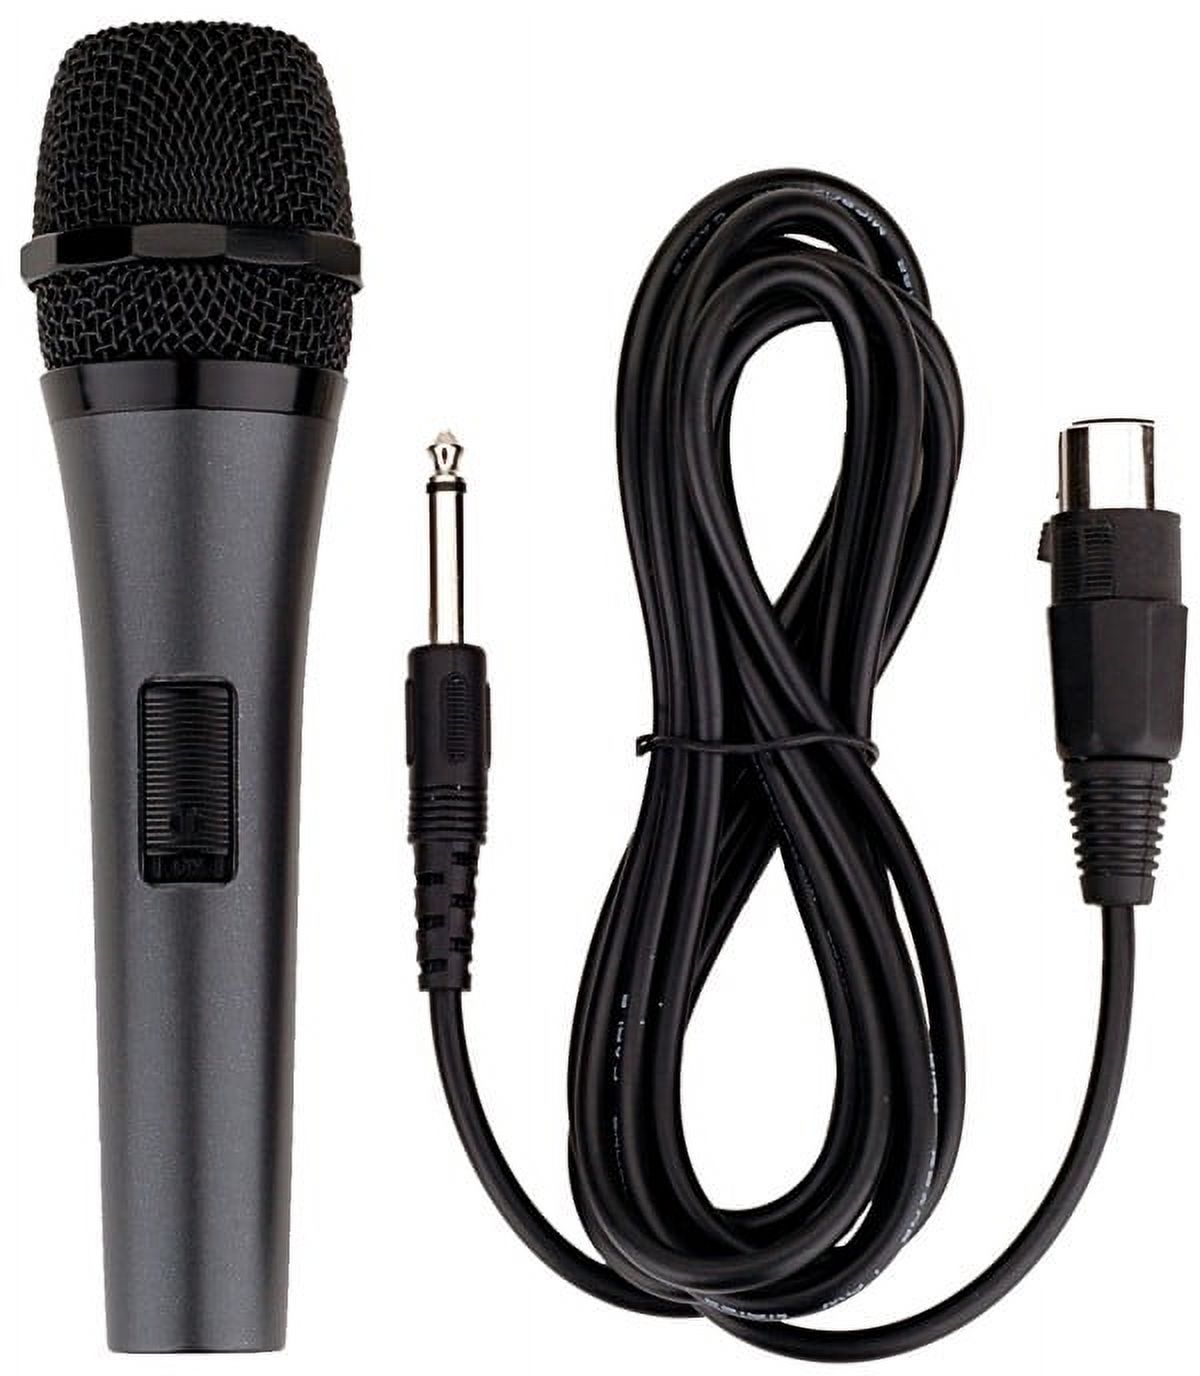 DOK Solutions - Emerson Professional Dynamic Microphone with Detachable Cord - image 3 of 3